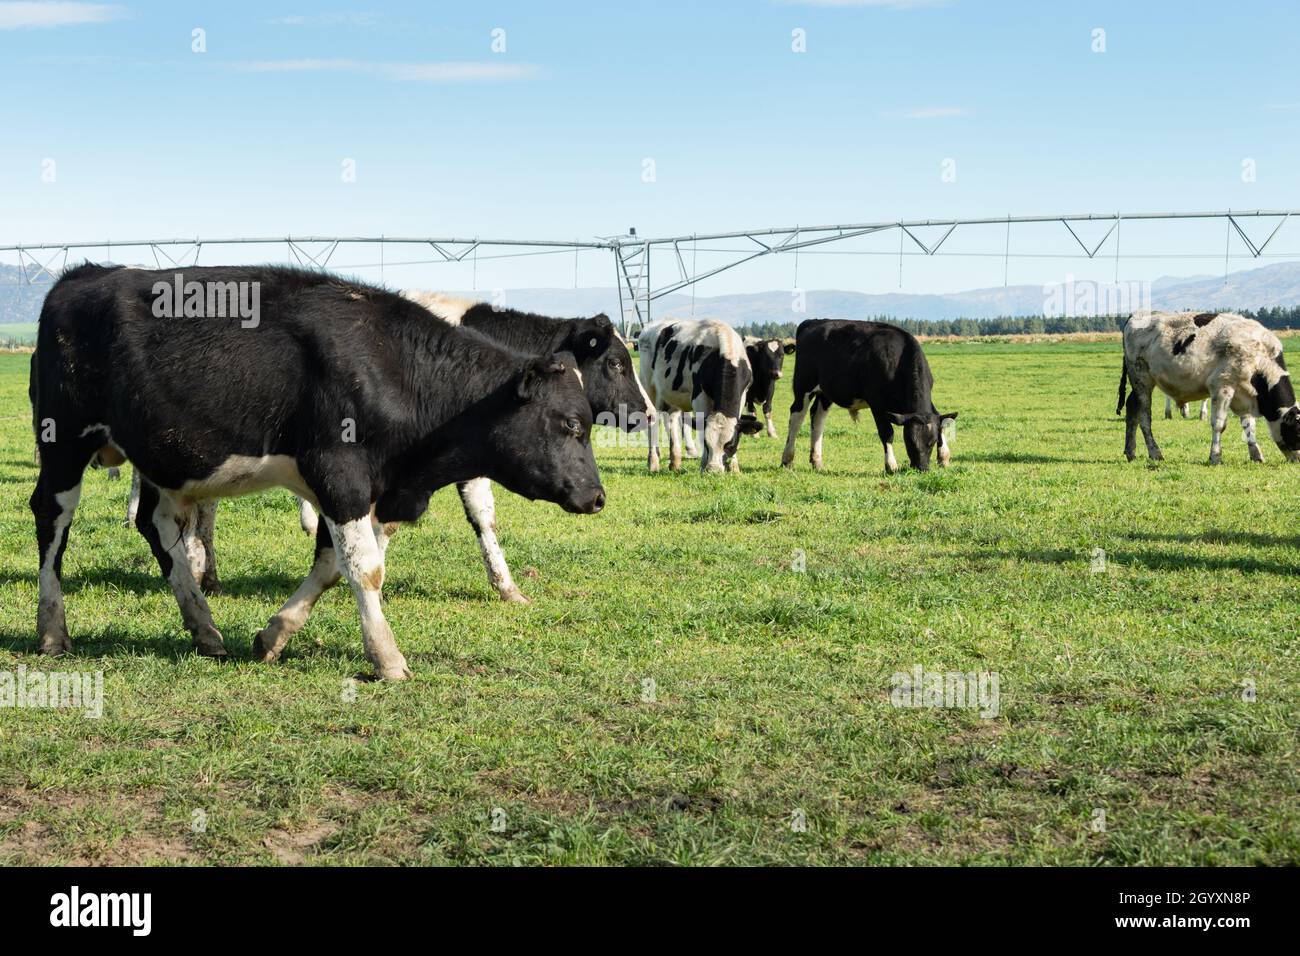 Curious cattle grazing on the green grassland with sprinkler irrigation system in the background, South Island. Stock Photo